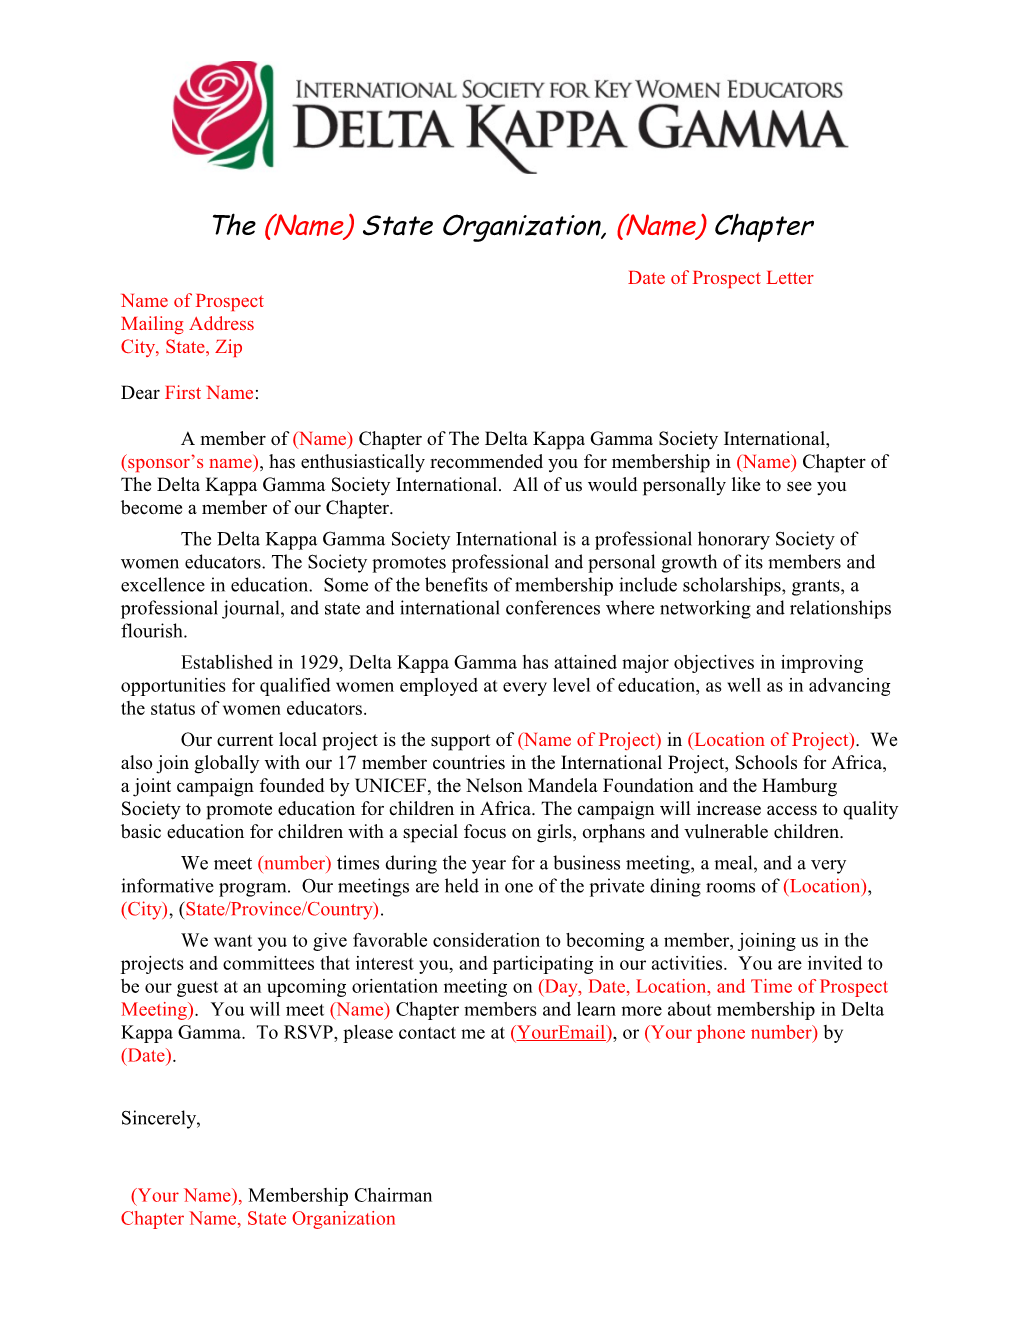 The (Name) State Organization, (Name) Chapter